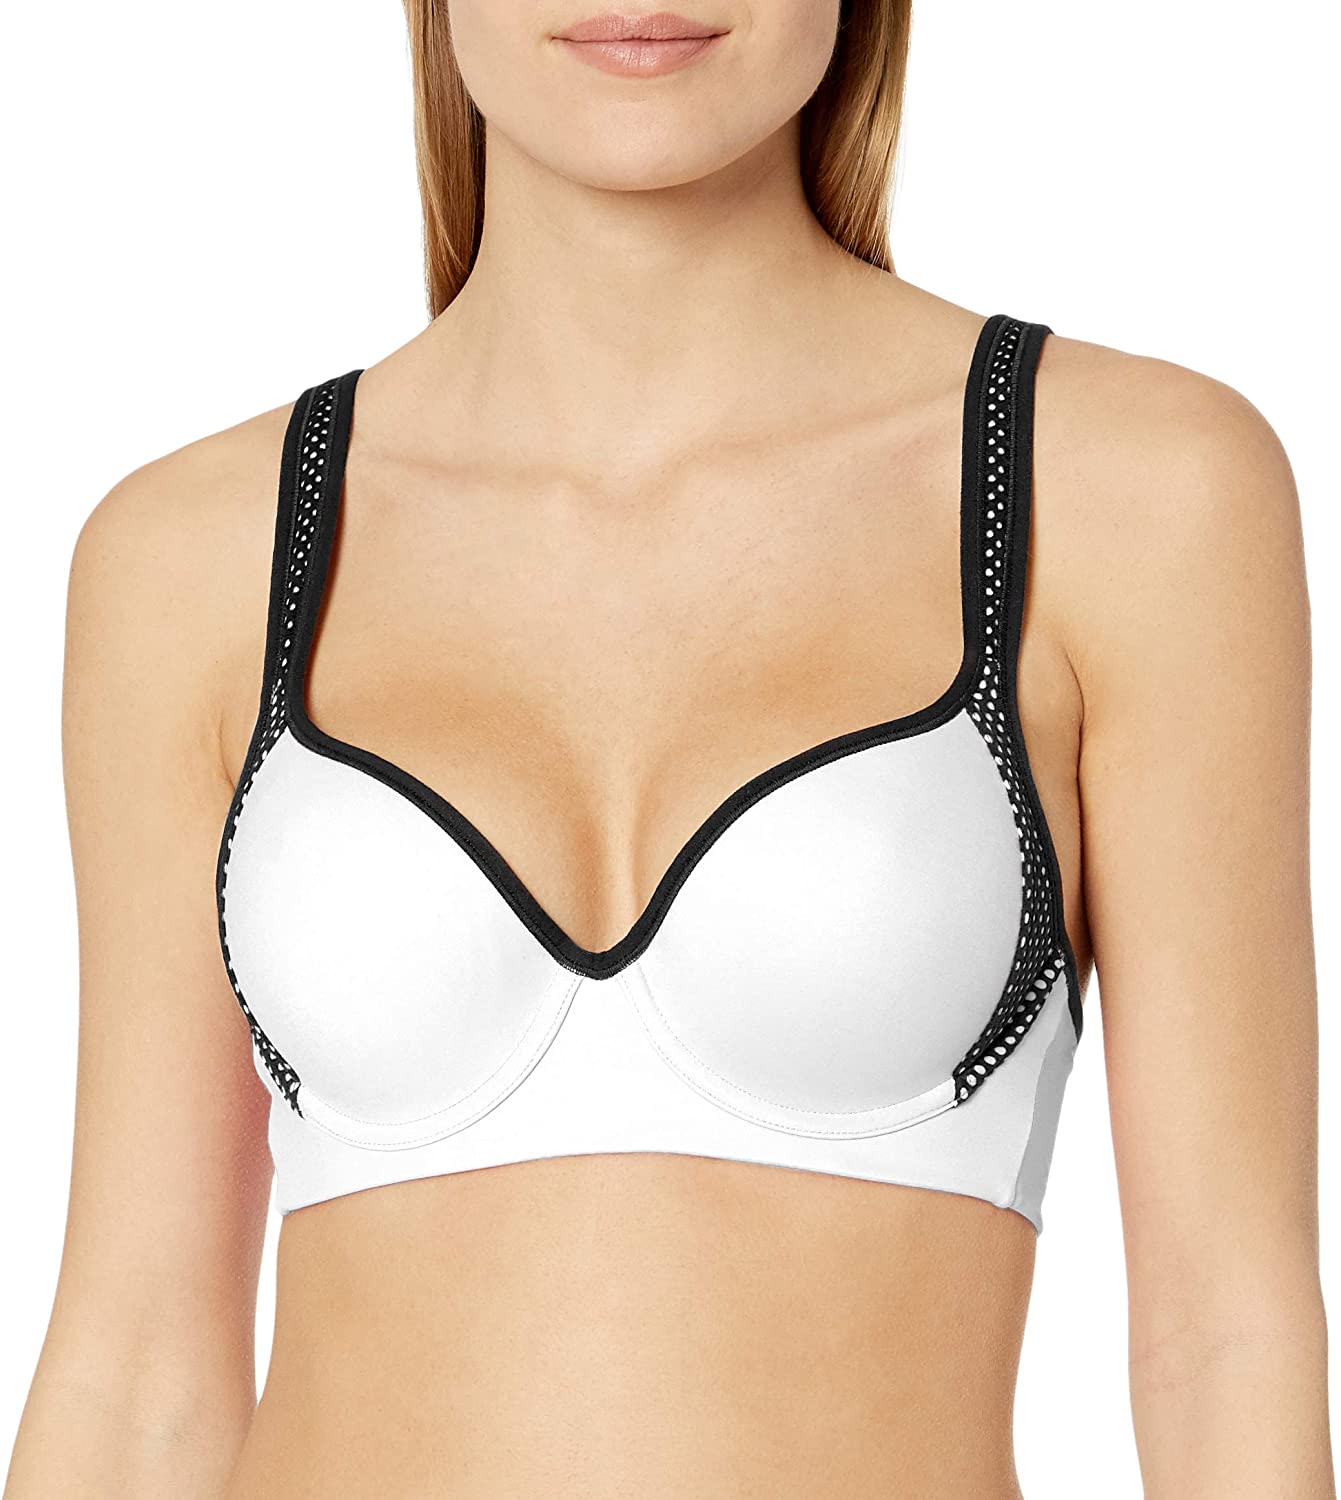 Best Overall Bra for Sagging Breasts